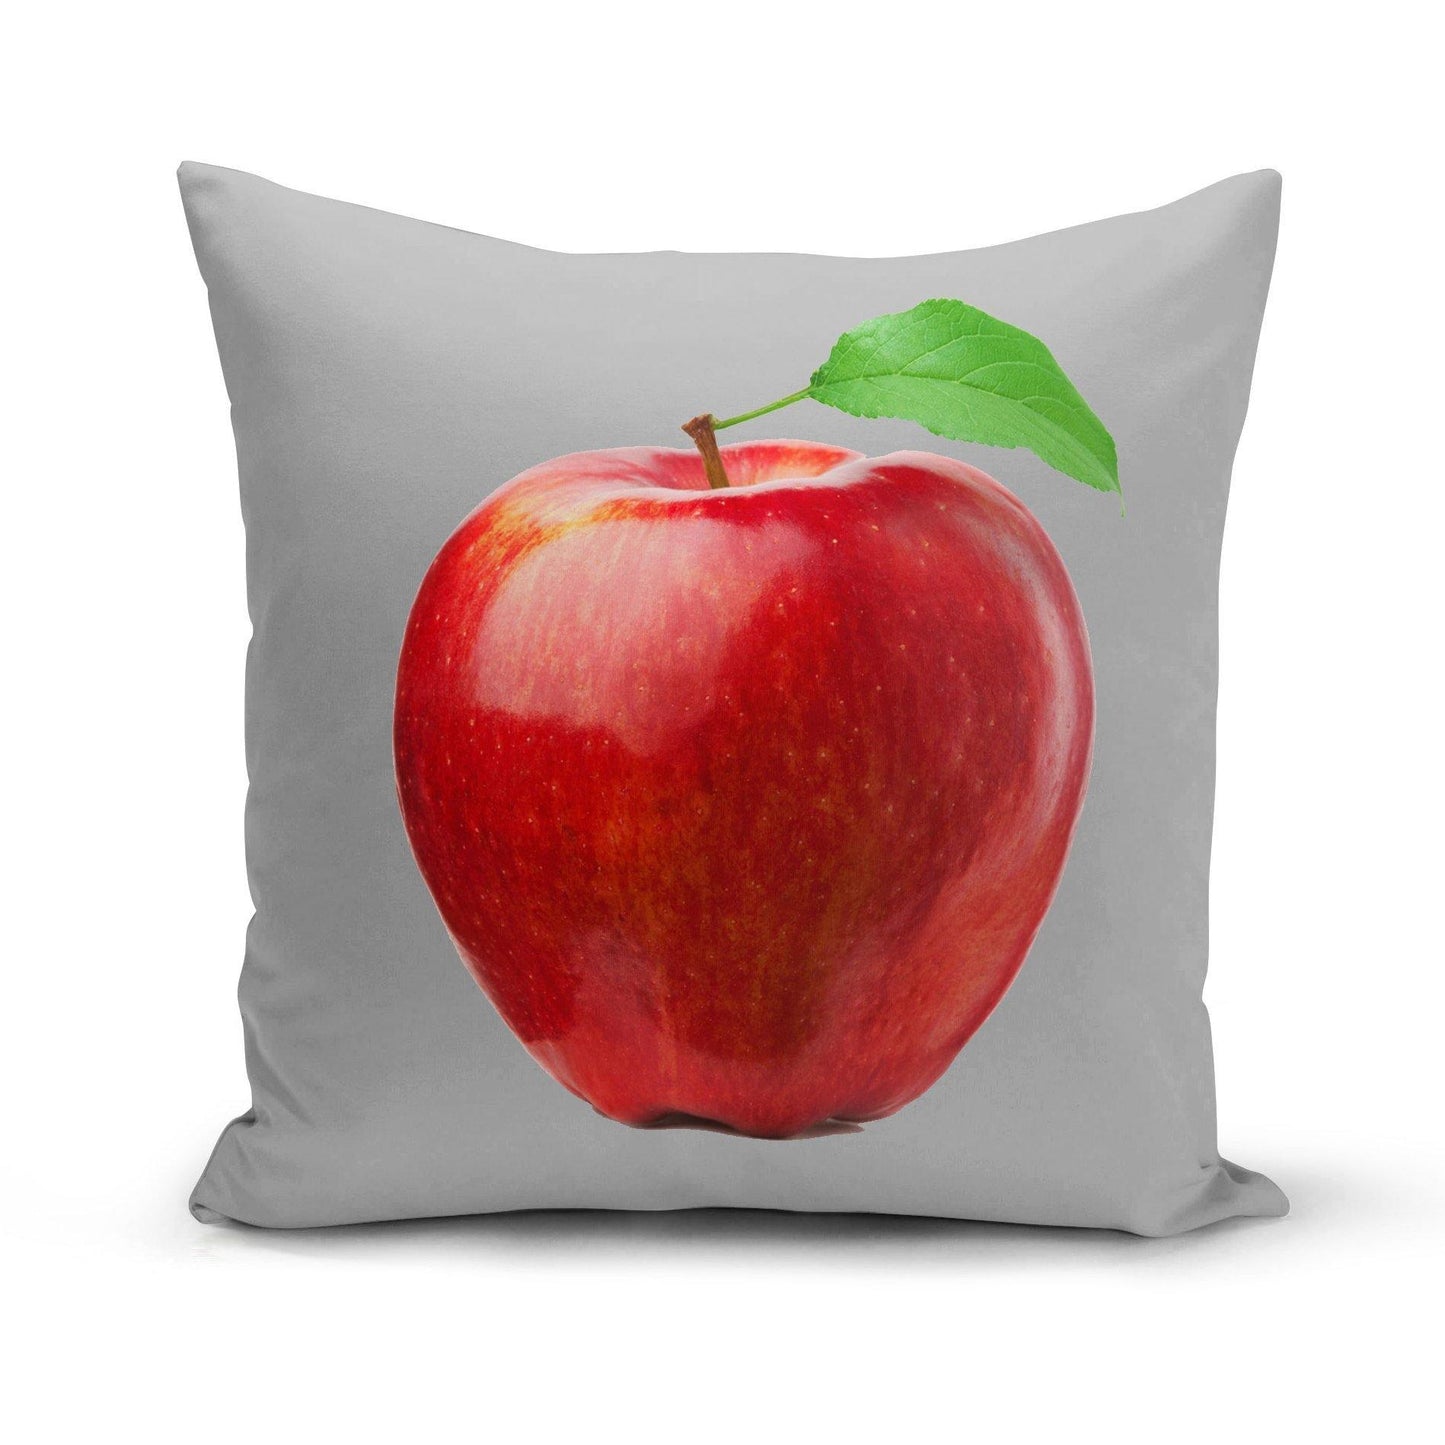 Apple Pillow Cover